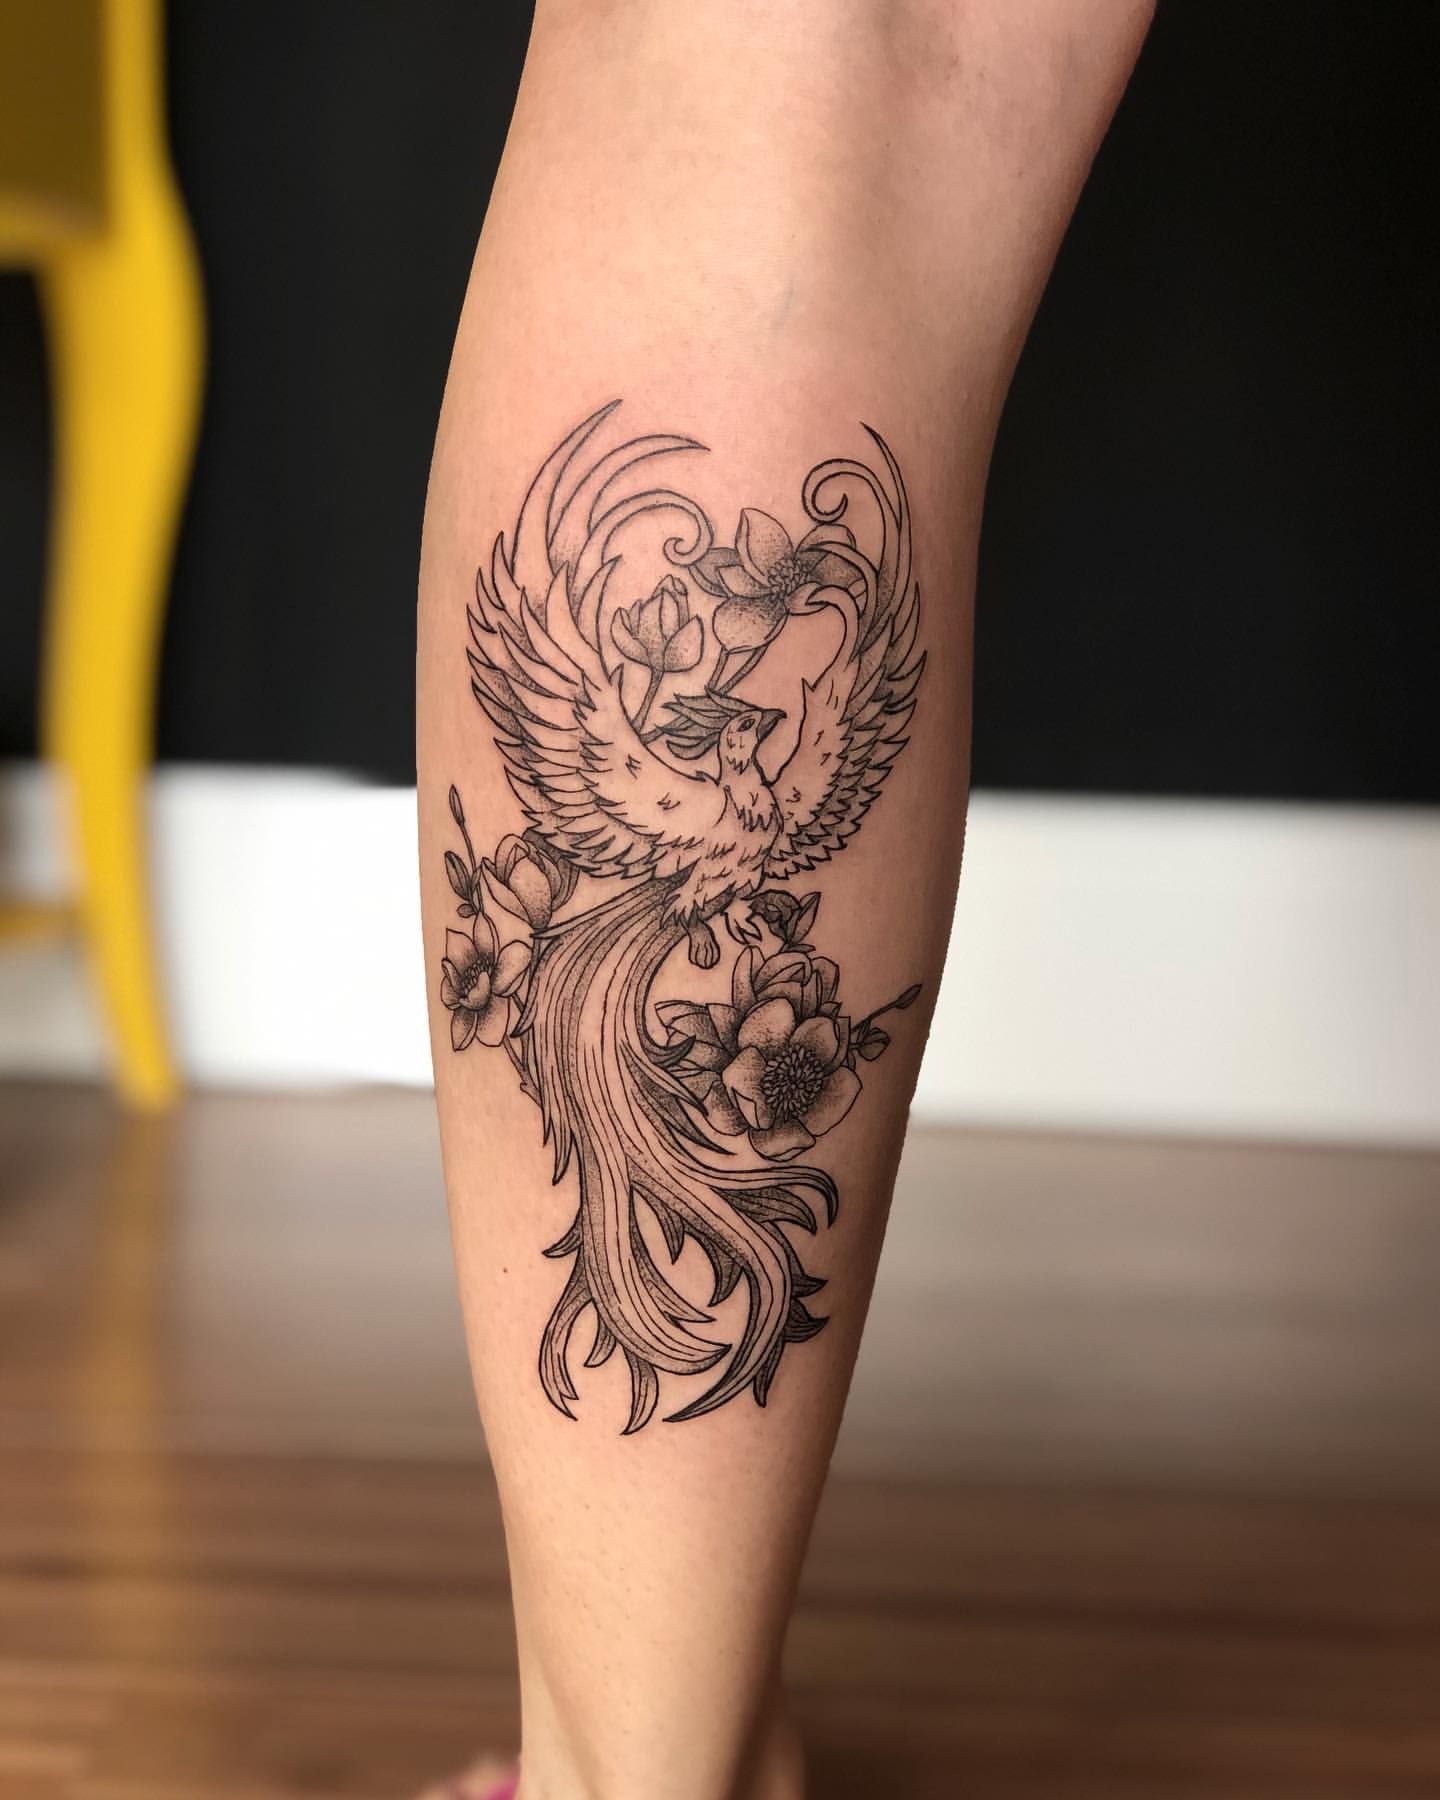 phoenix rising from the ashes tattoos  Google Search  Phoenix tattoo for  men Phoenix tattoo Phoenix tattoo sleeve